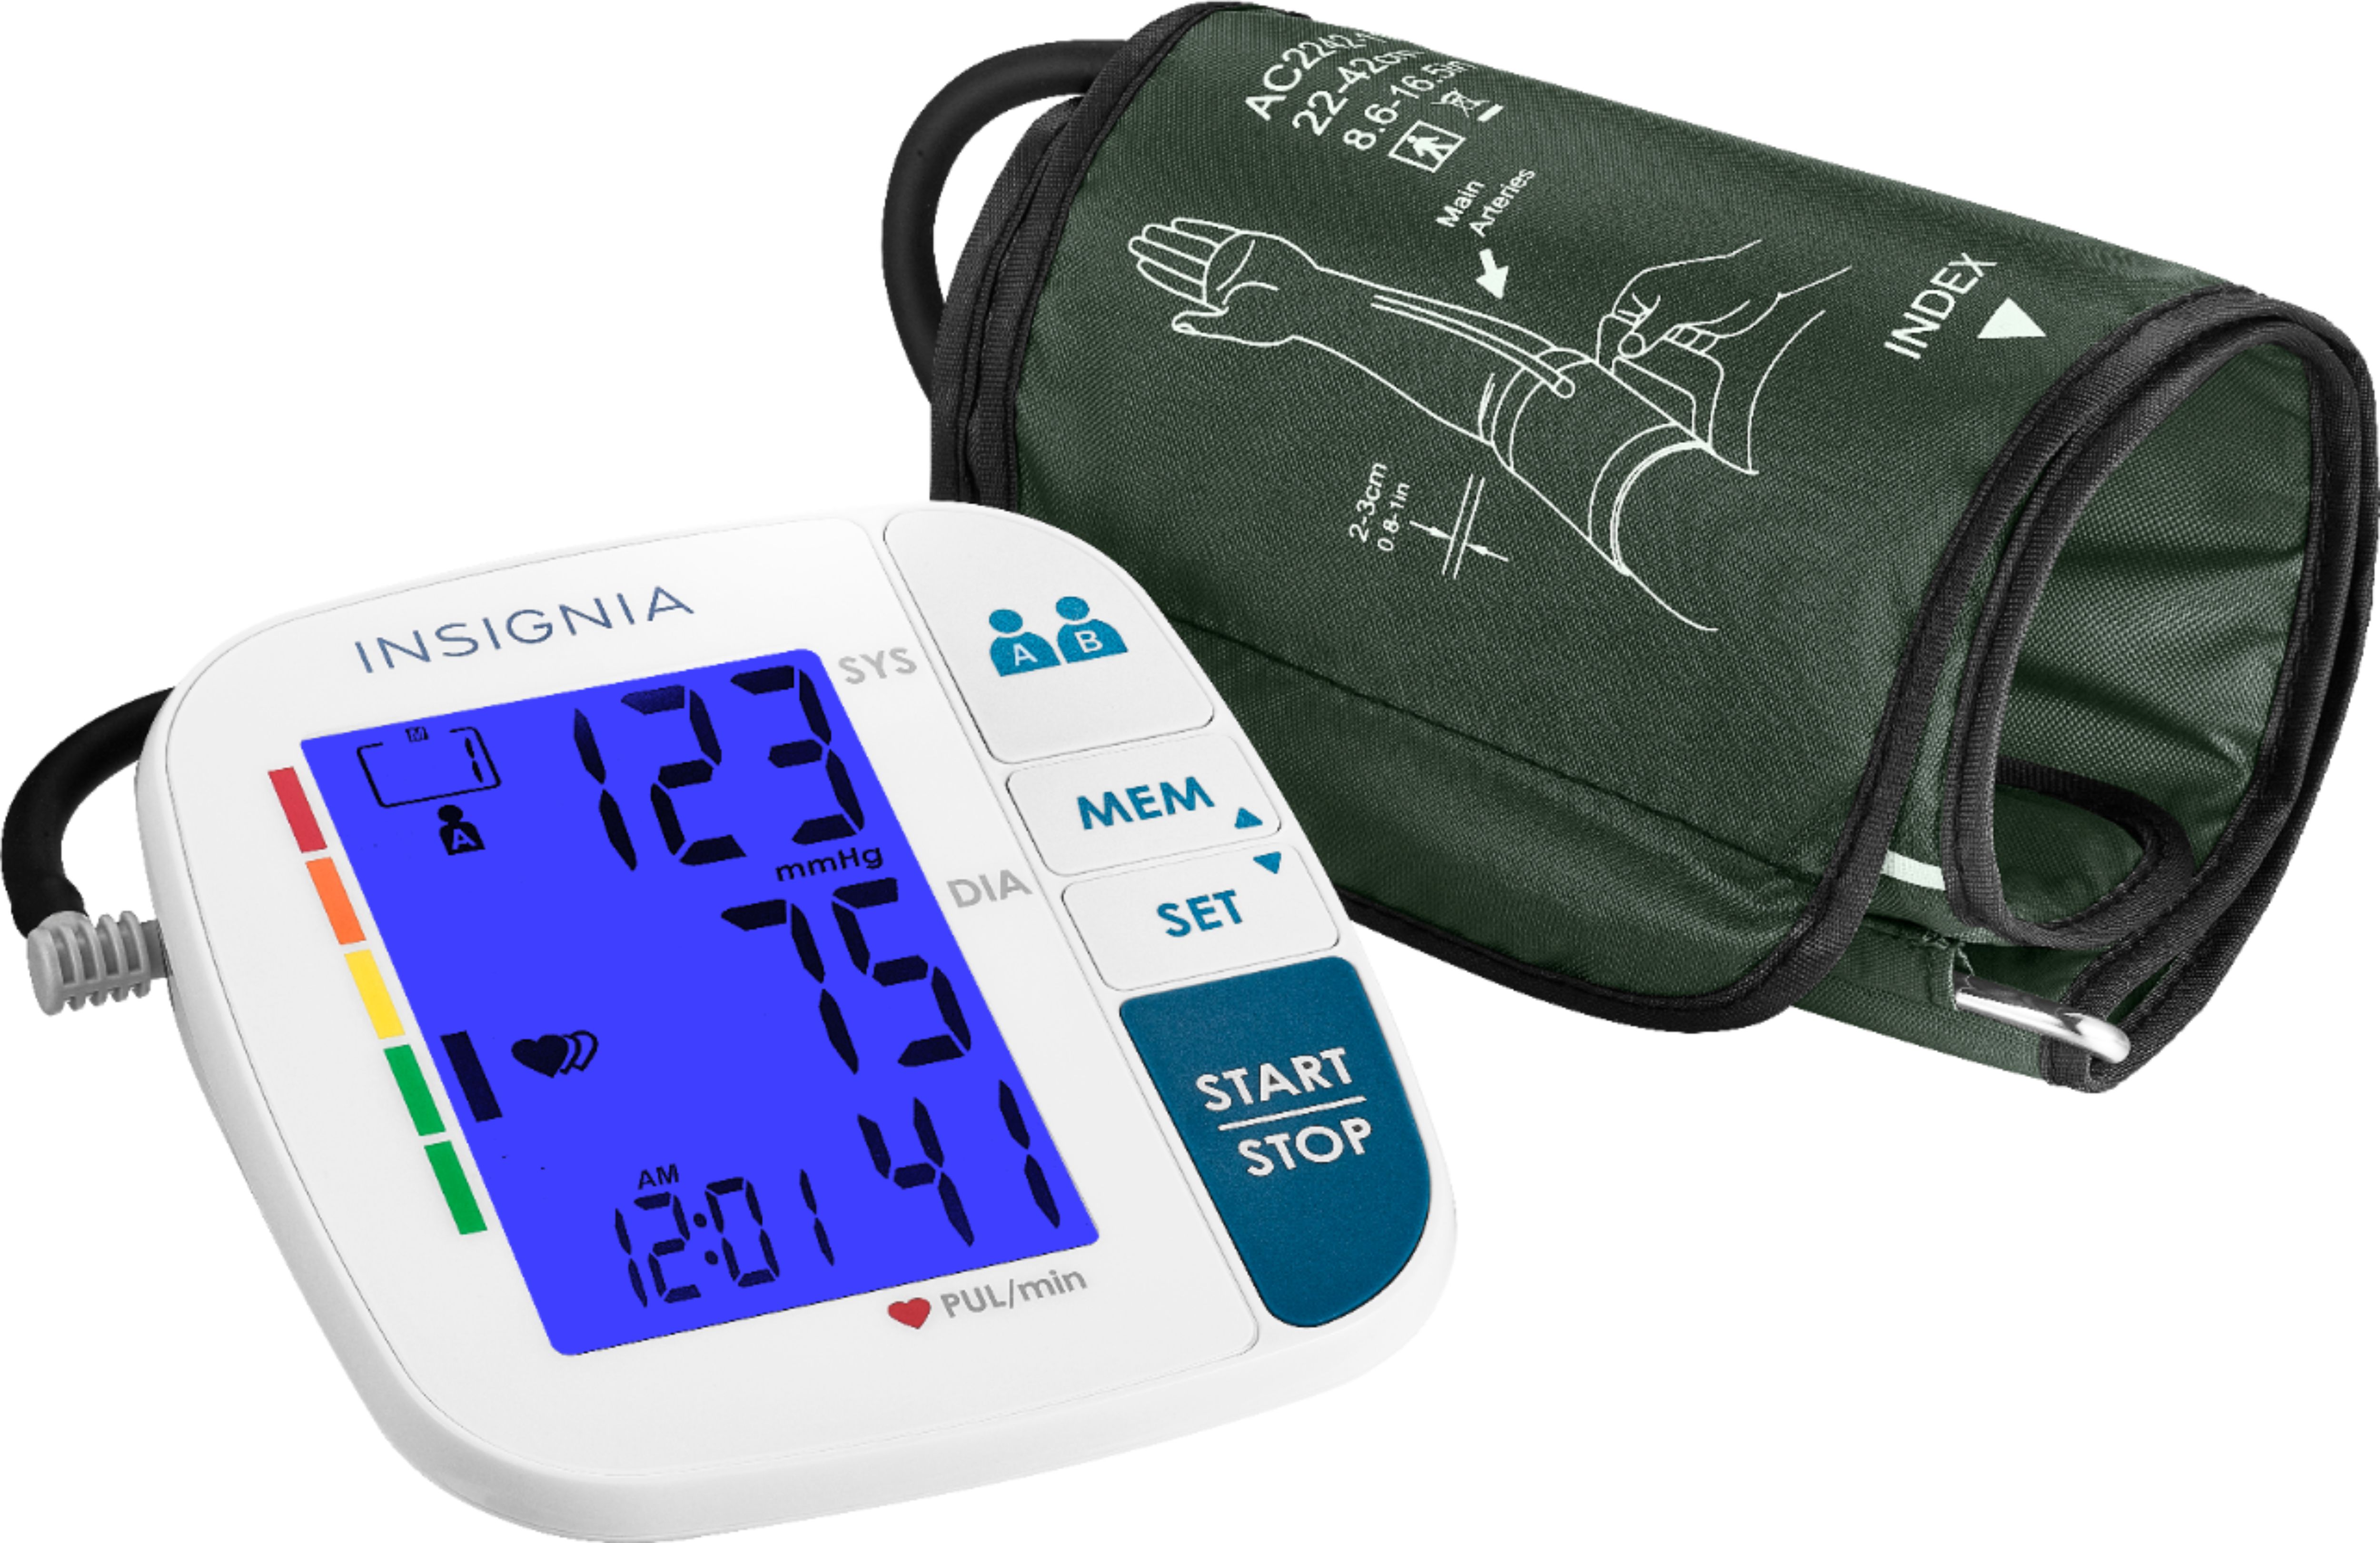 DBP-1359 Digital Blood Pressure monitor: Accurate and Reliable Readings with Advanced Technology